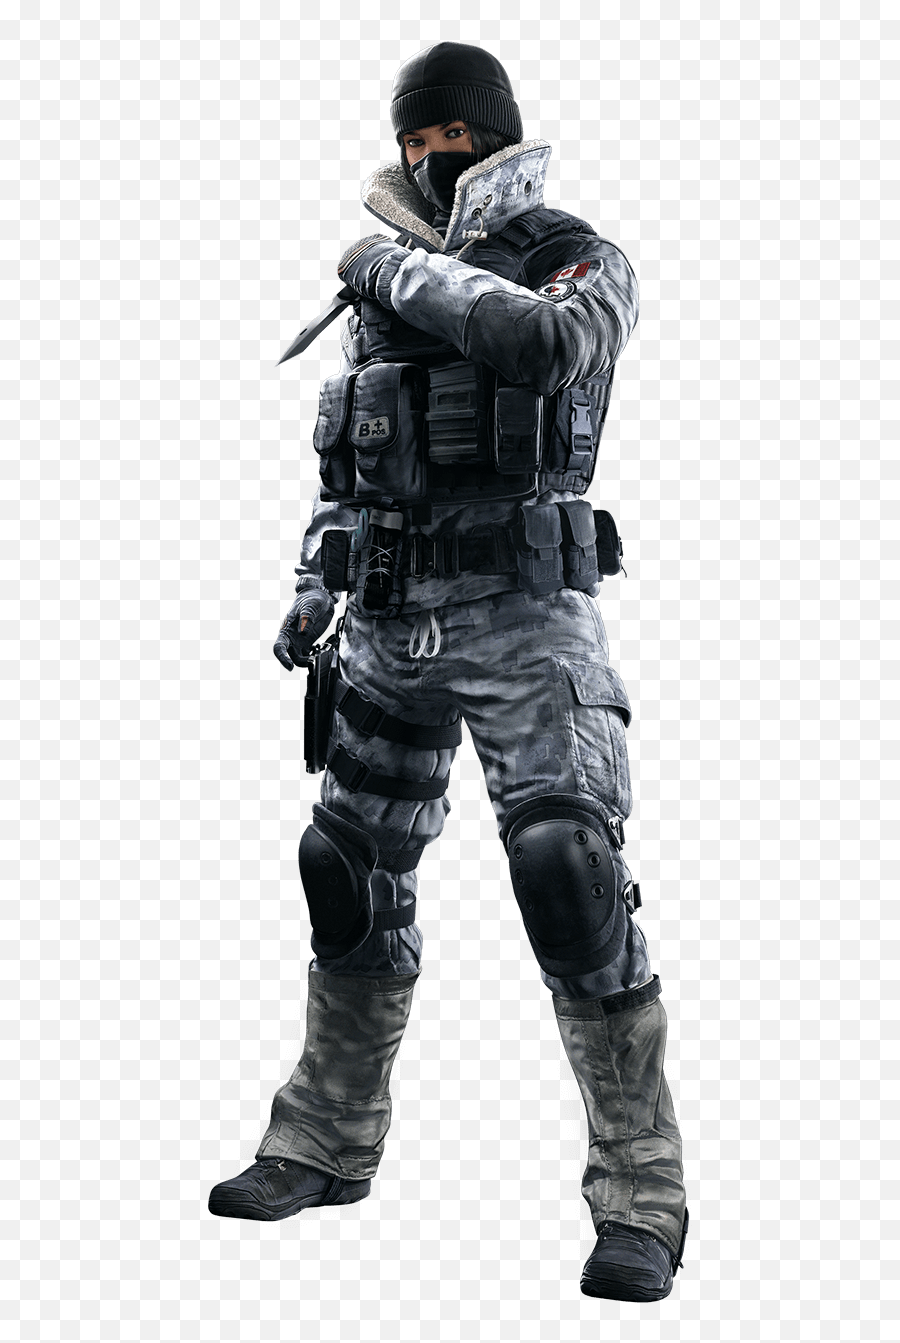 Frost Rainbow Six Siege Png Image - Rainbow Six Siege Renders,Frost Png